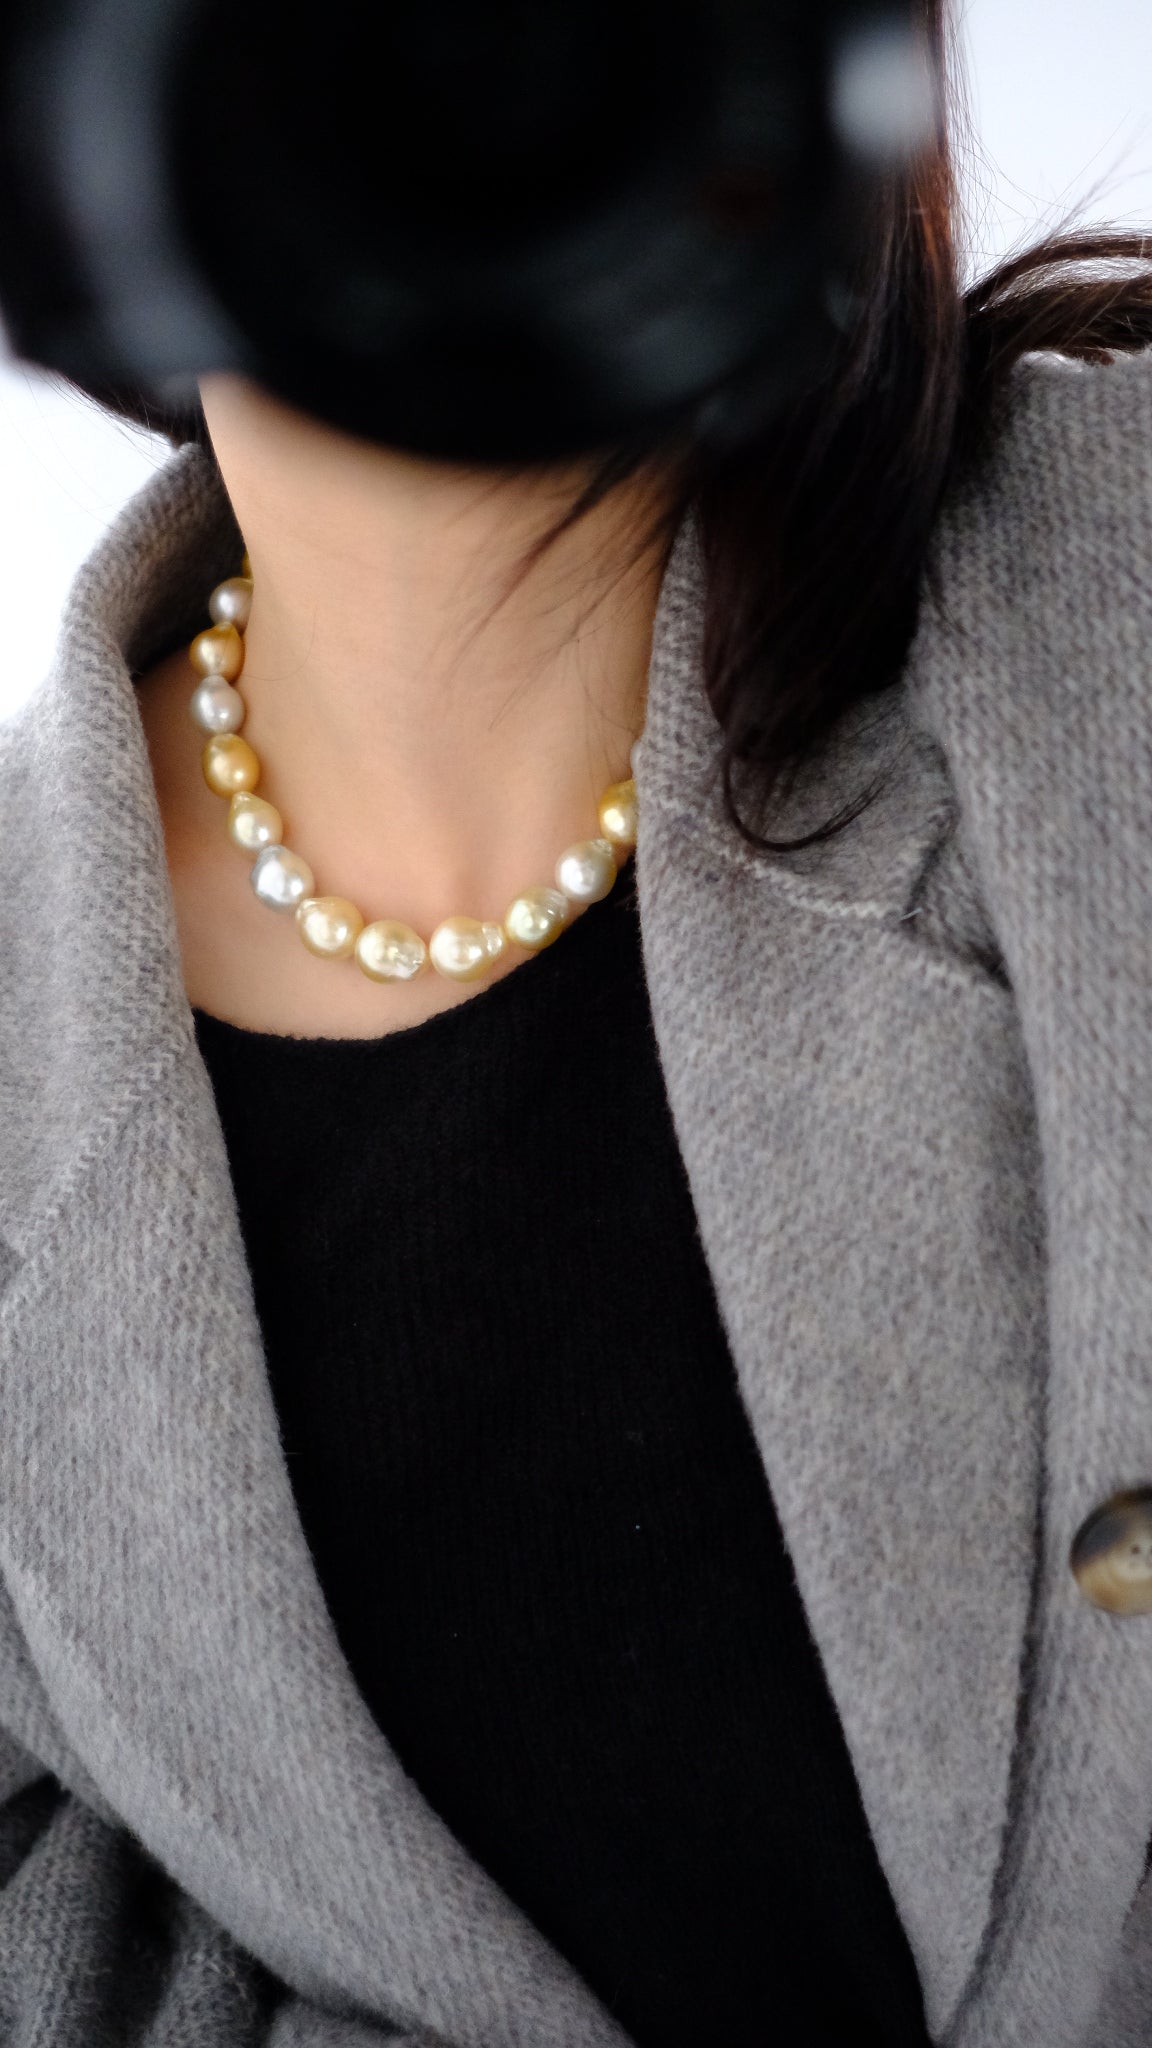 Golden South Sea Pearl Necklace, Baroque, 11.1-14.6mm